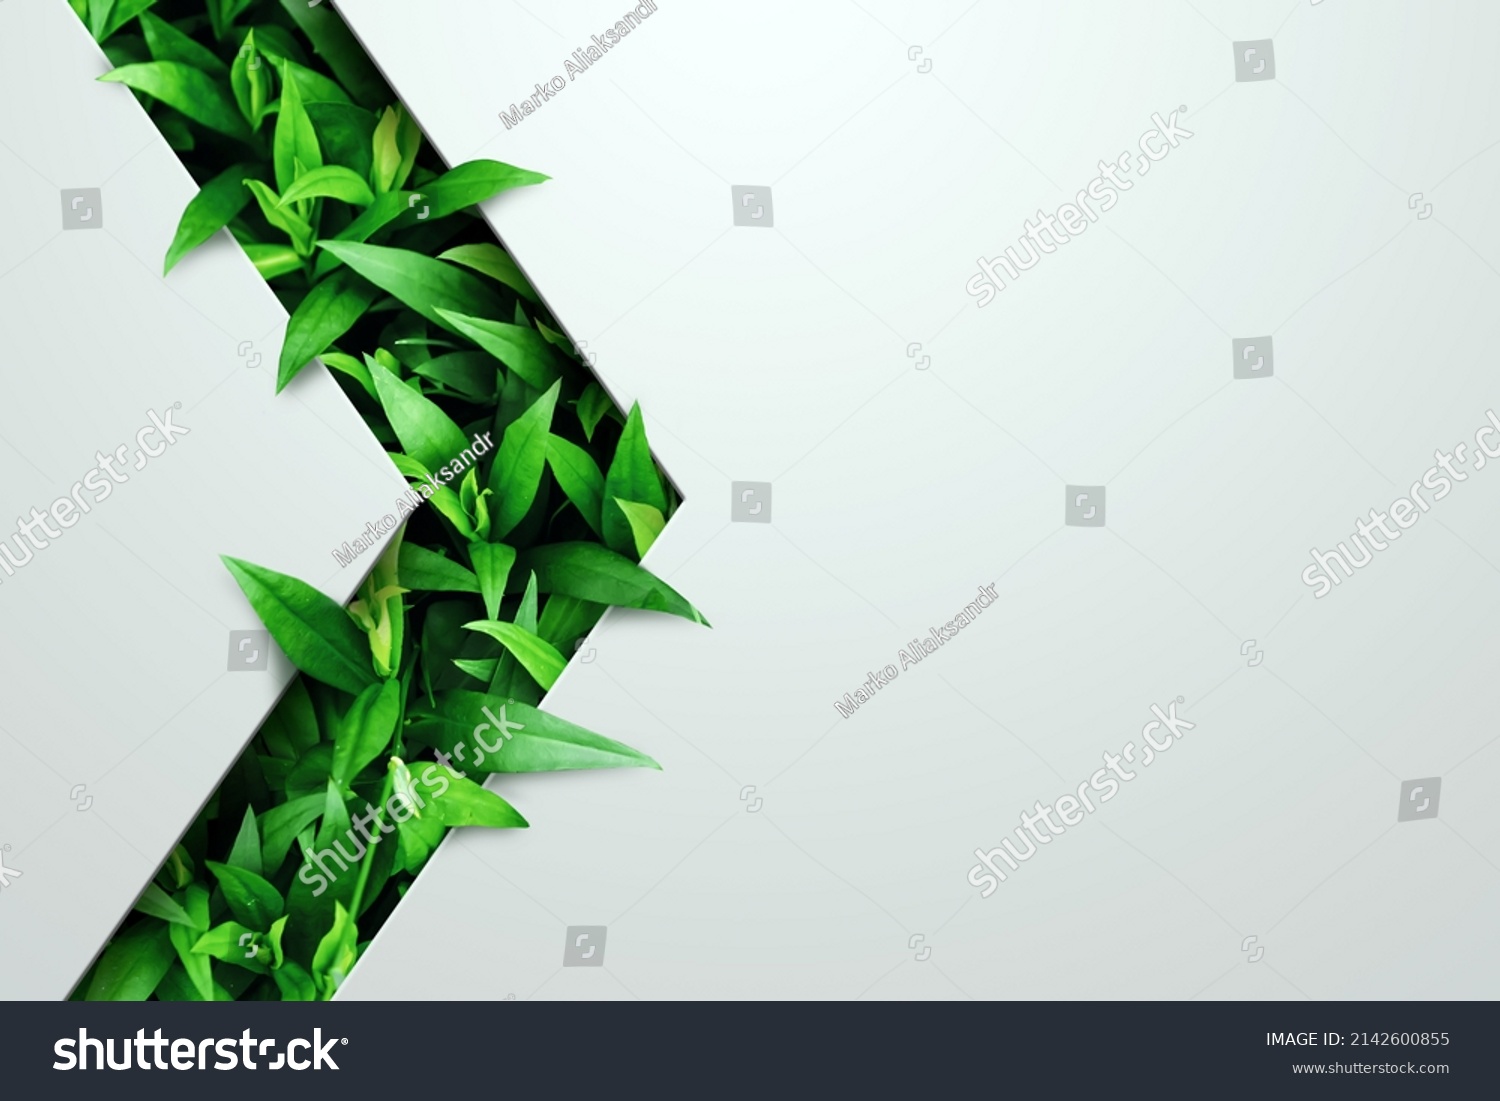 Natural concept, environment and organic products. Green abstract arrow, natural design. Natural design, flyer layout, marketing material, copy space #2142600855